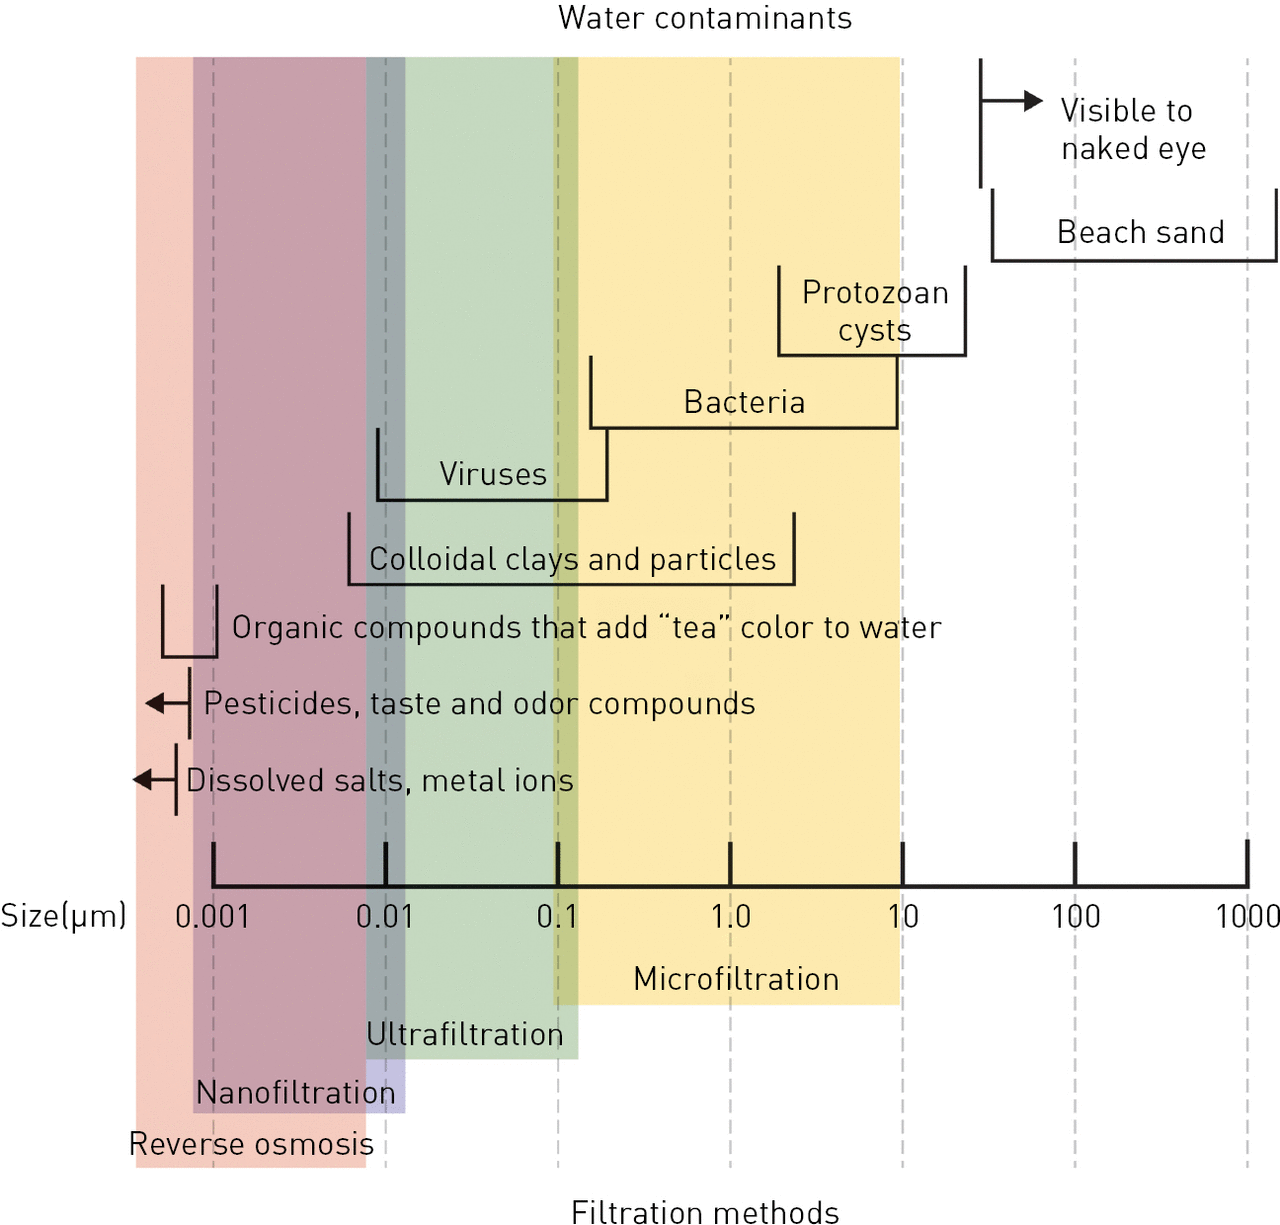 Figure 2-01. Water contaminants: particle sizes & filtration methods